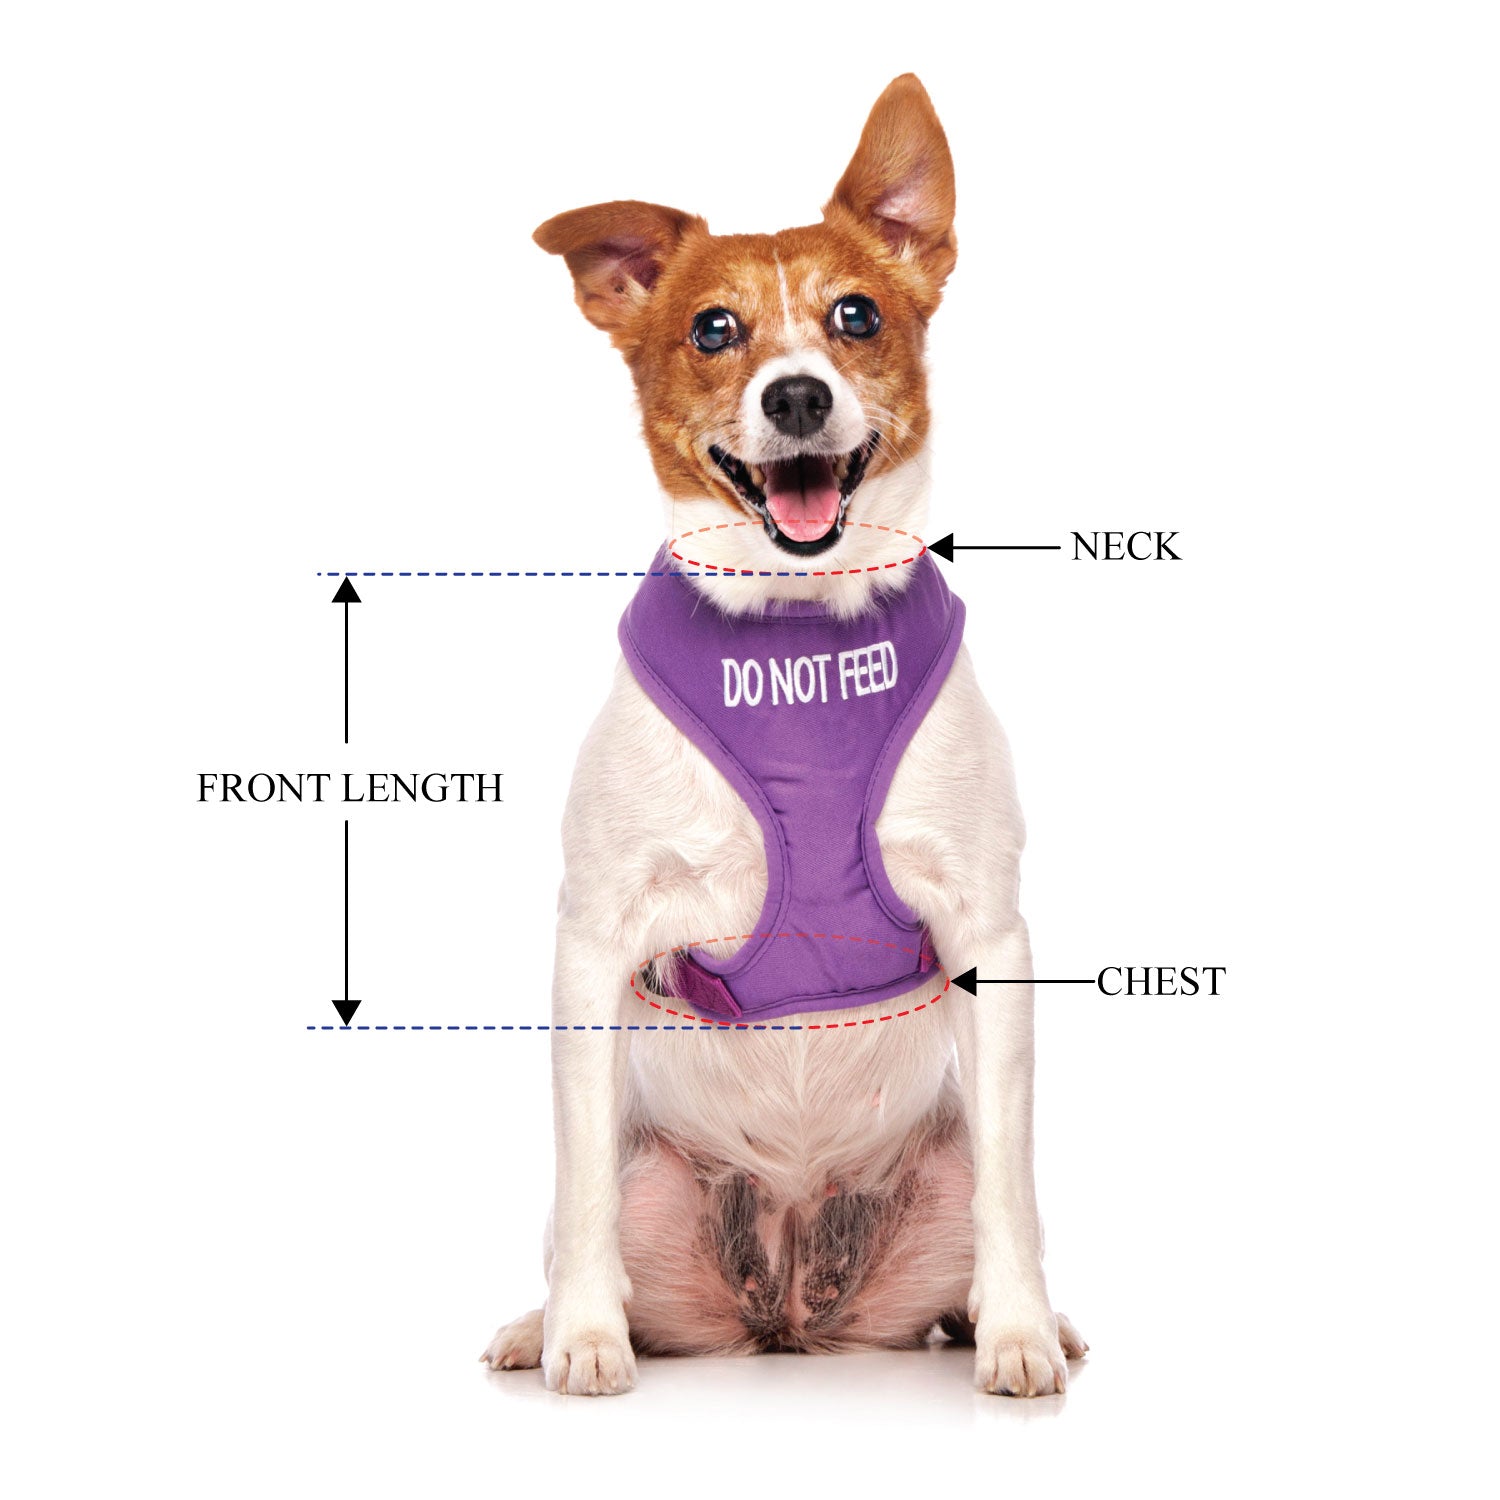 DO NOT FEED - Small adjustable Vest Harness